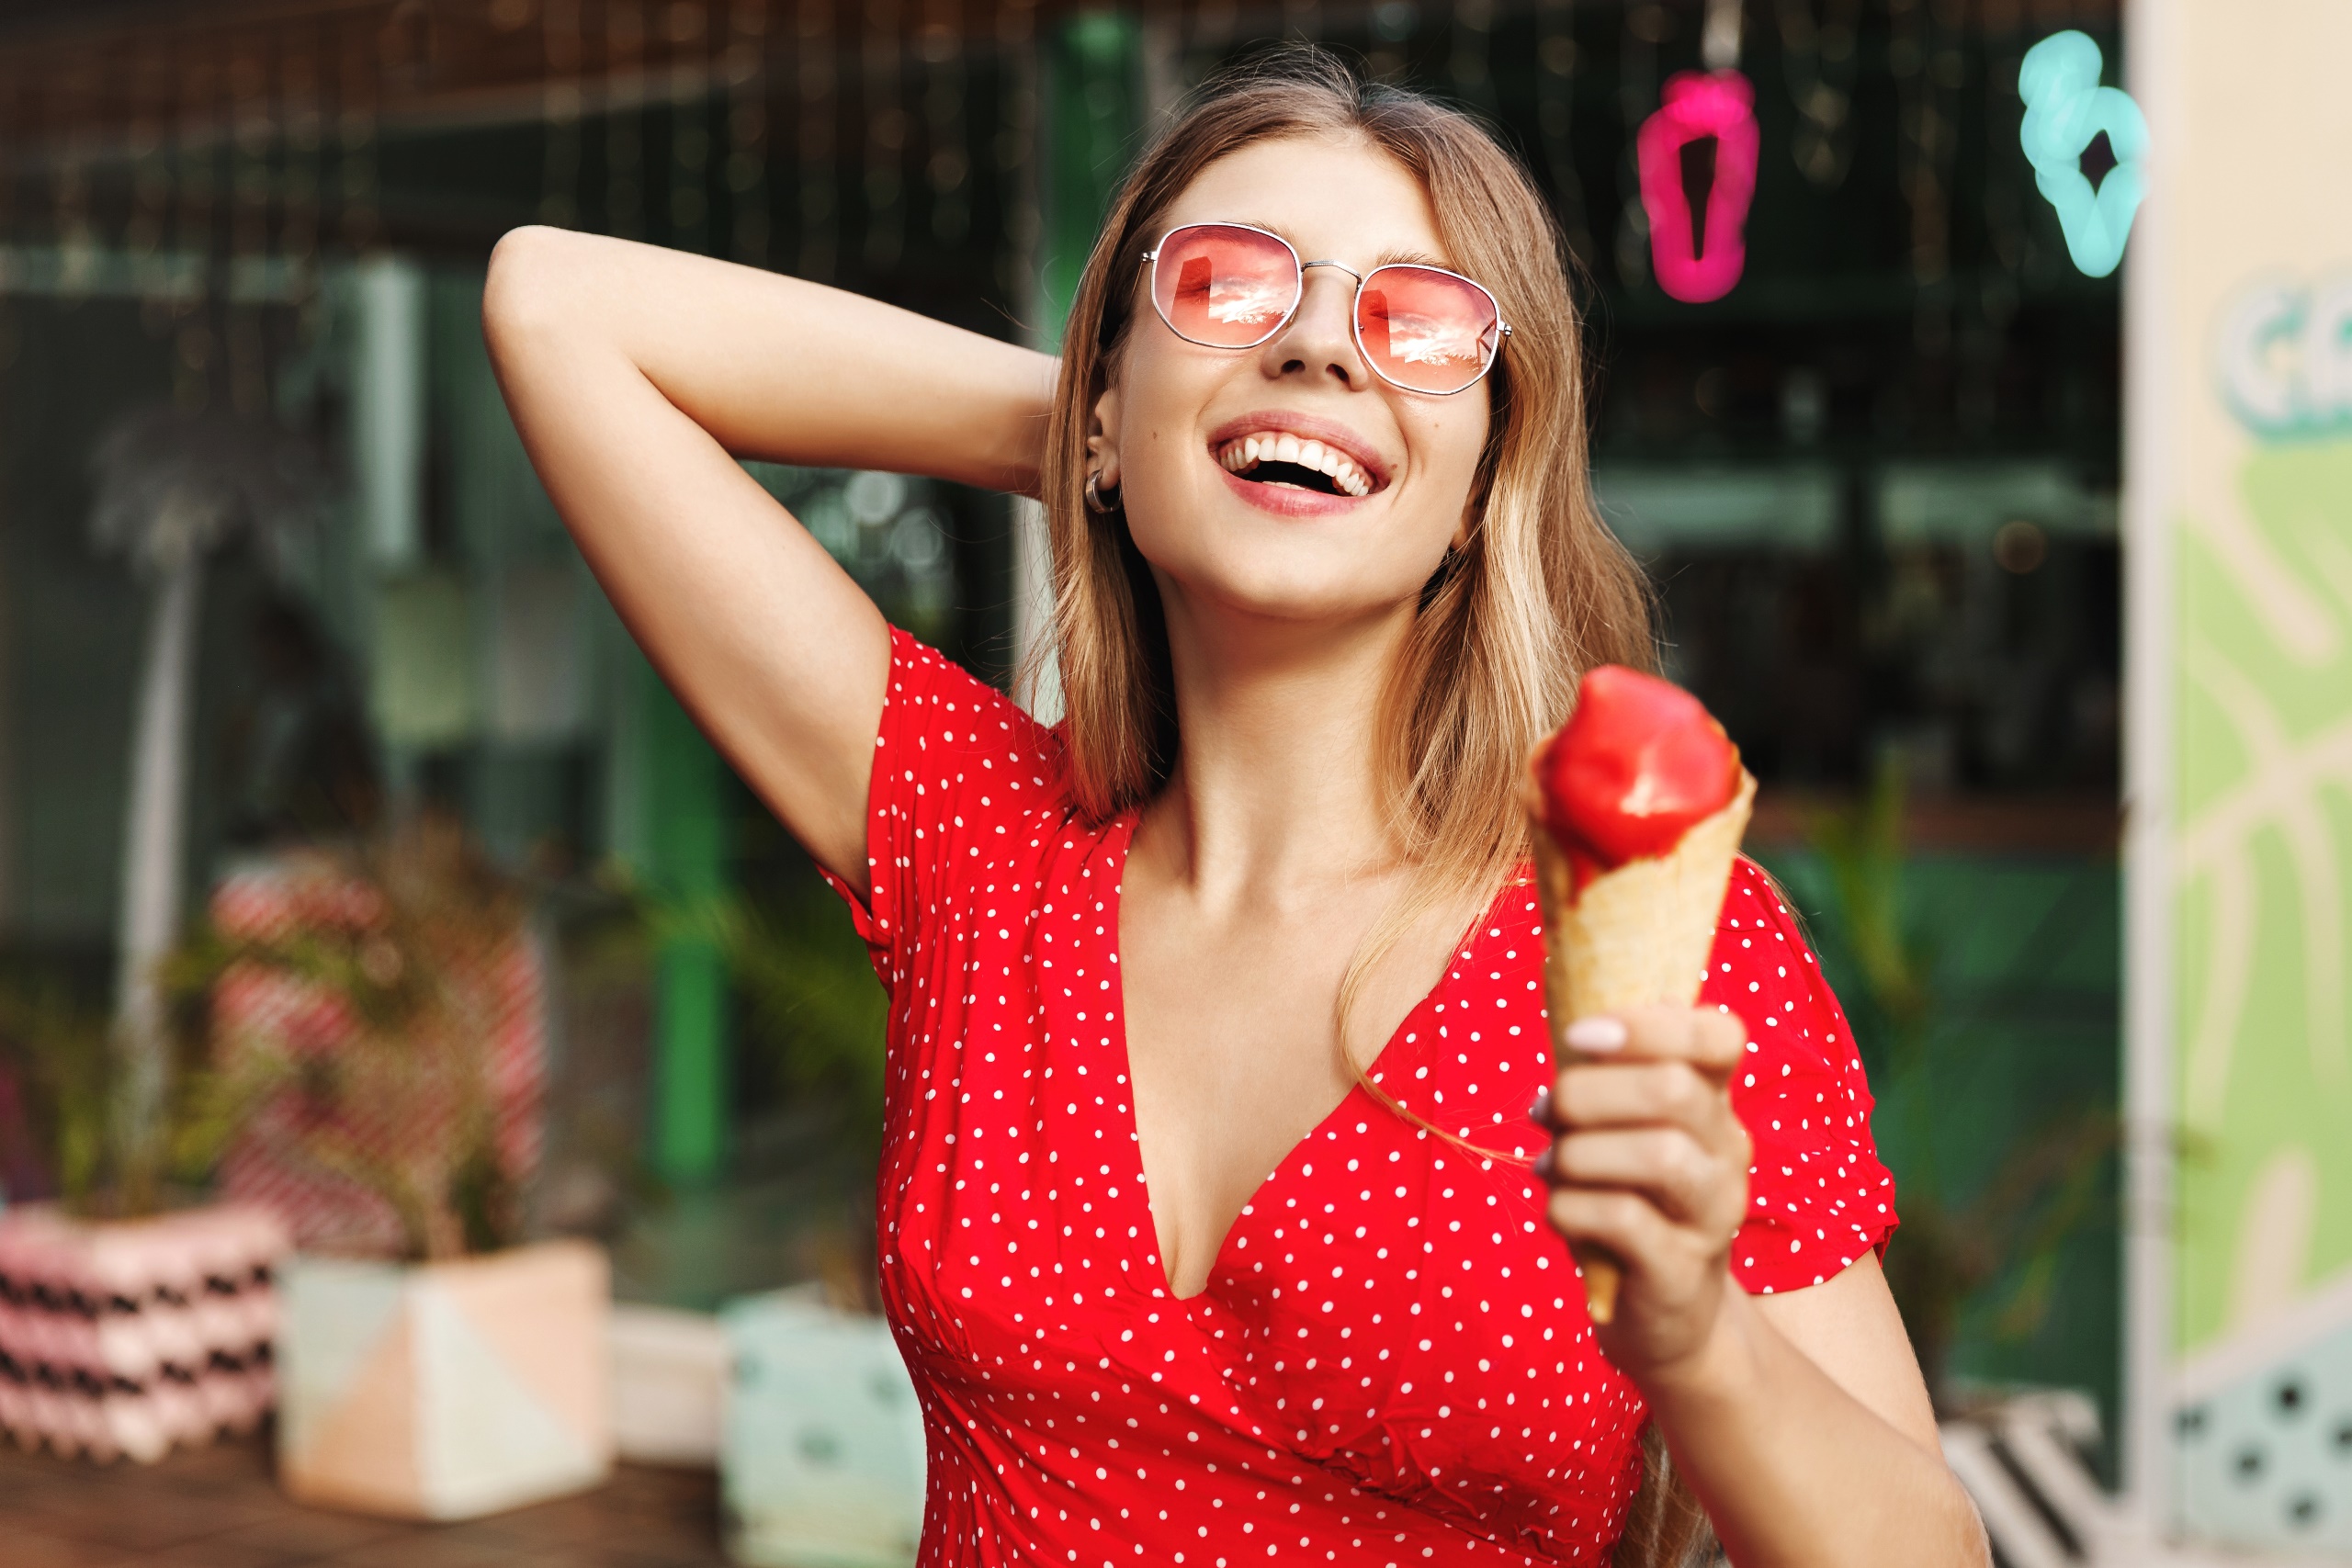 Women Model Women With Shades Ice Cream Food Sweets Happy Dress Red Dress Arms Up Shades Open Mouth  2560x1707